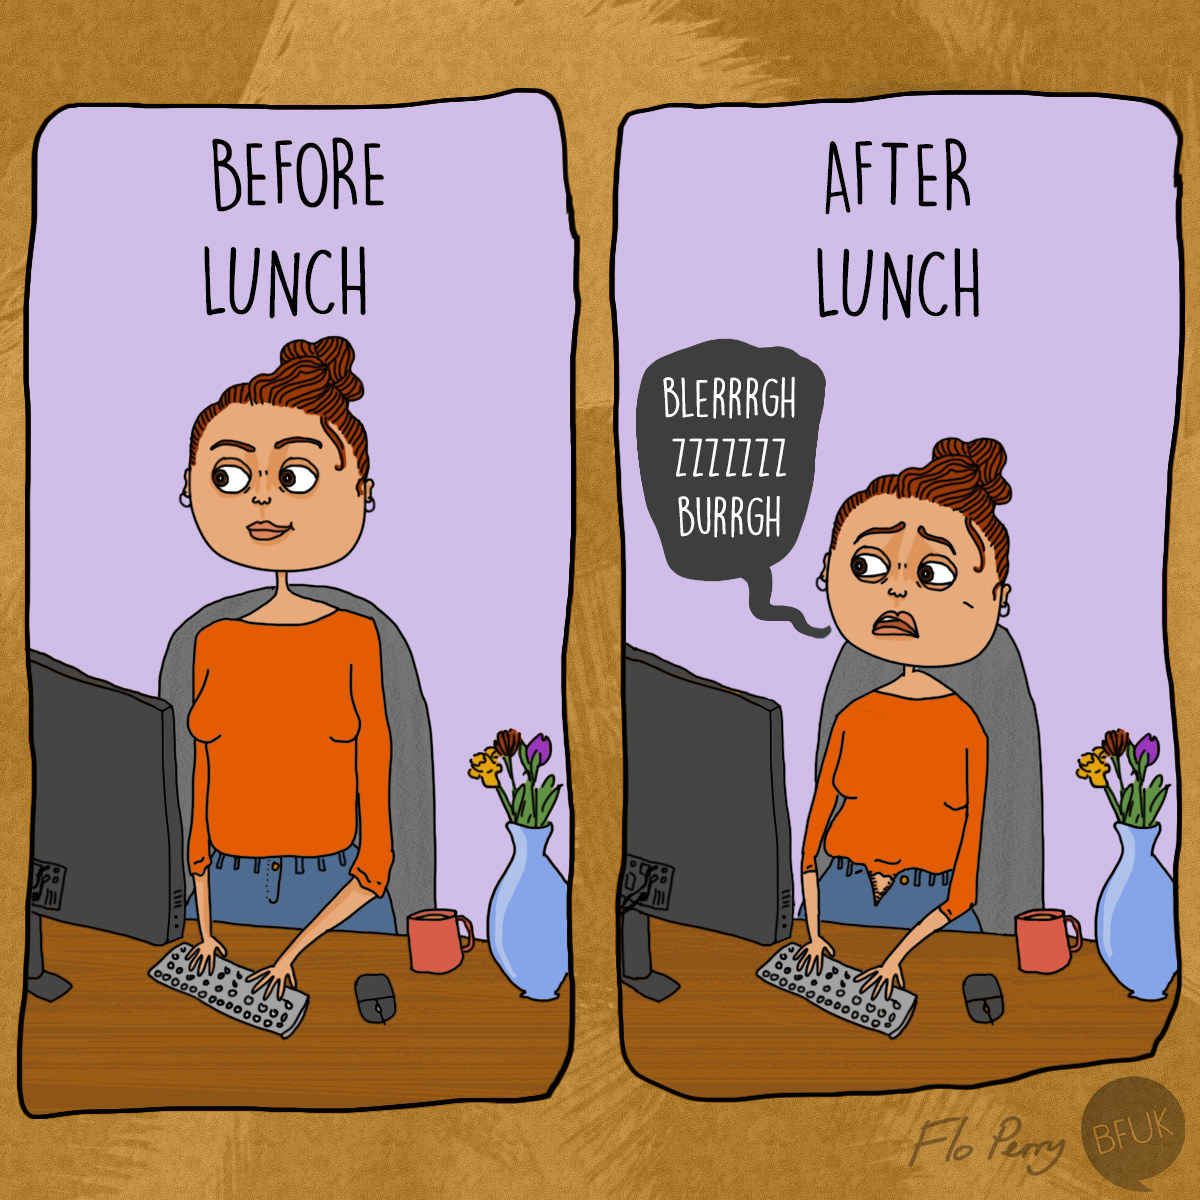 Gif of before lunch and after lunch